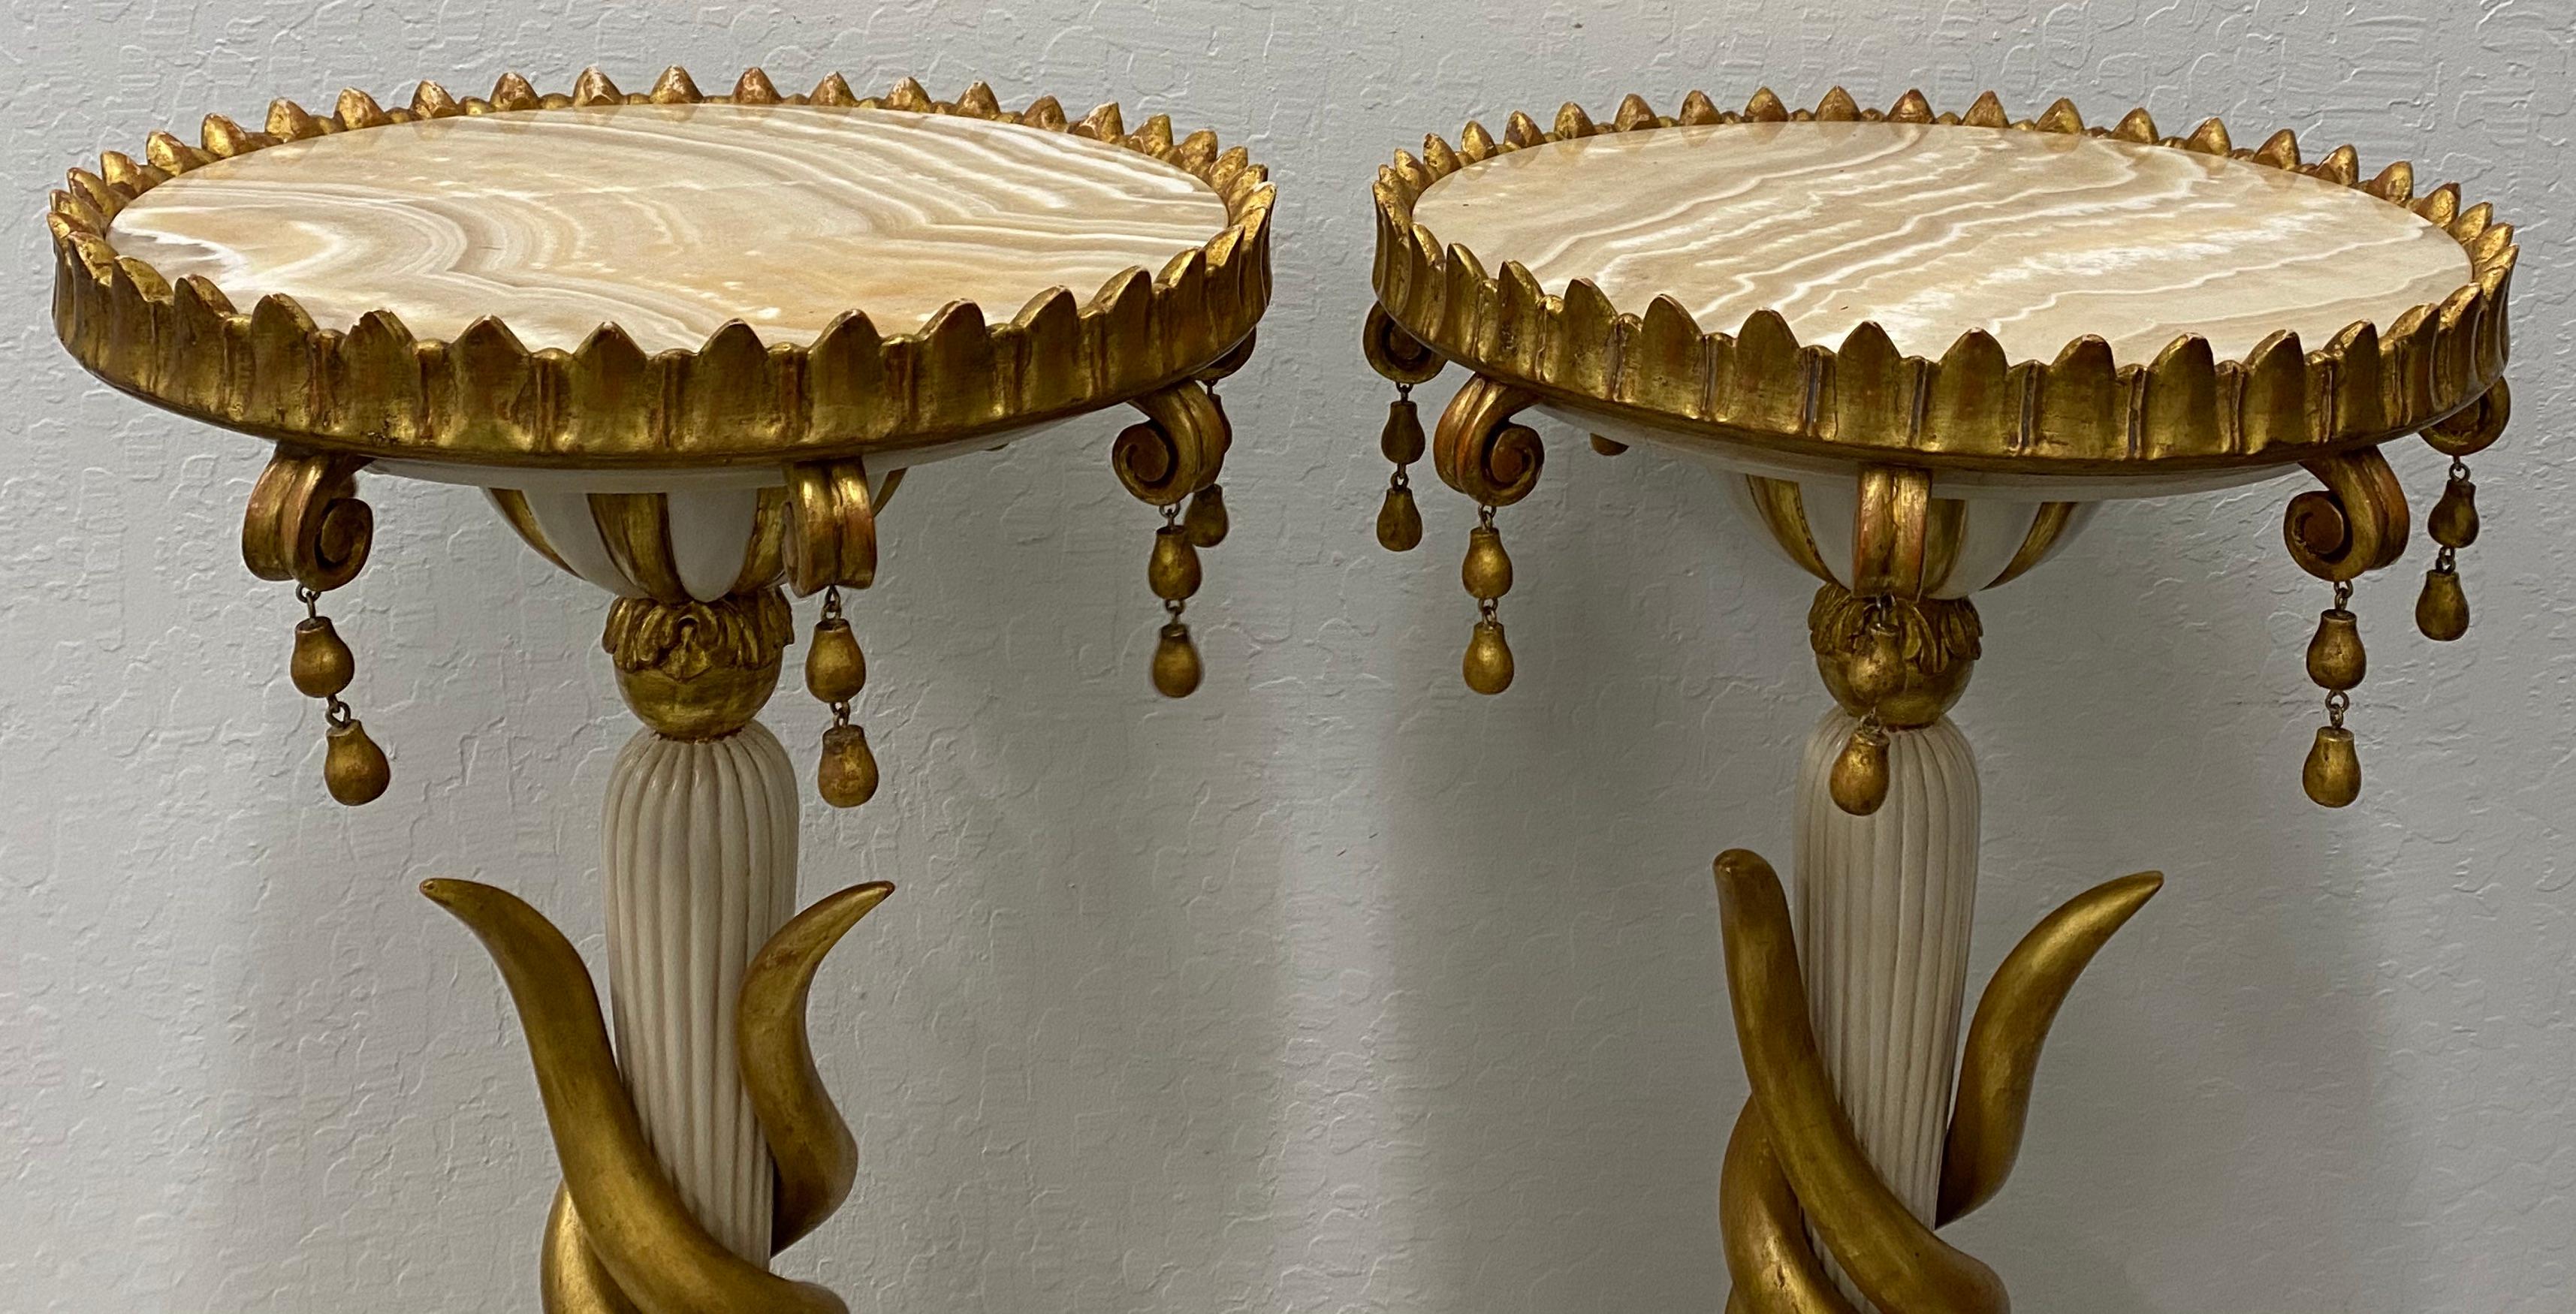 Matching Pair of Carved and Gilded Marble-Top Gueridon Stands, circa 1940 For Sale 1